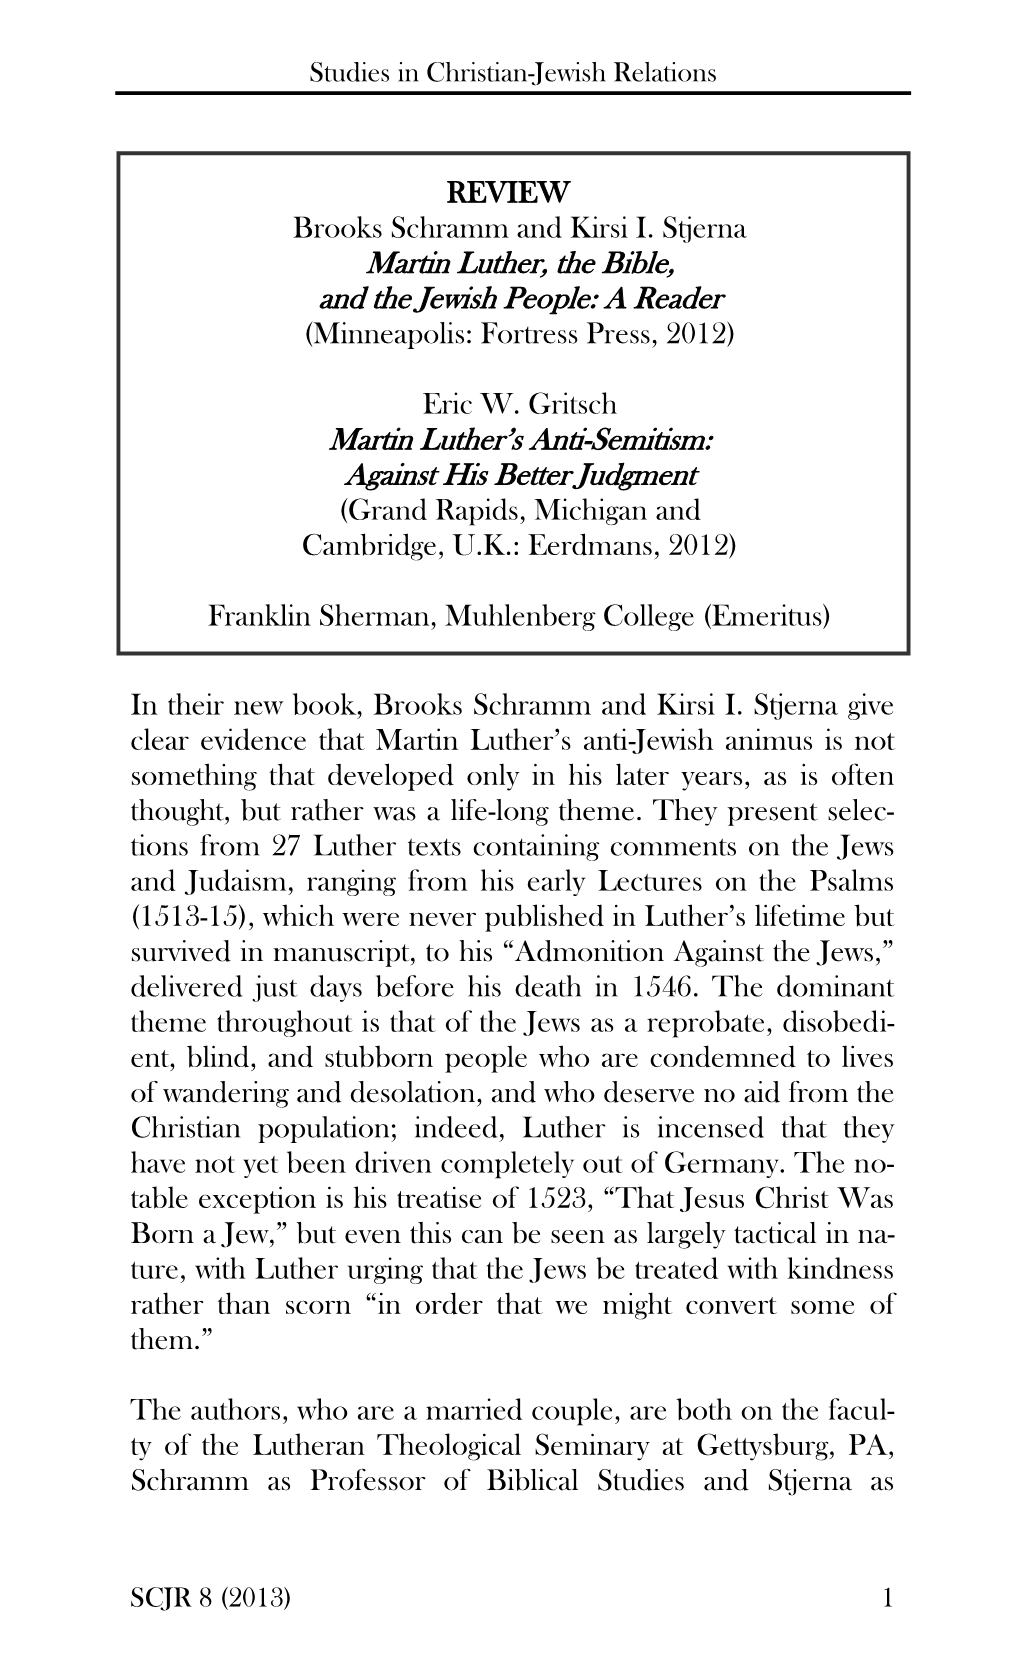 REVIEW Brooks Schramm and Kirsi I. Stjerna Martin Luther, the Bible, and the Jewish People: a Reader (Minneapolis: Fortress Press, 2012)